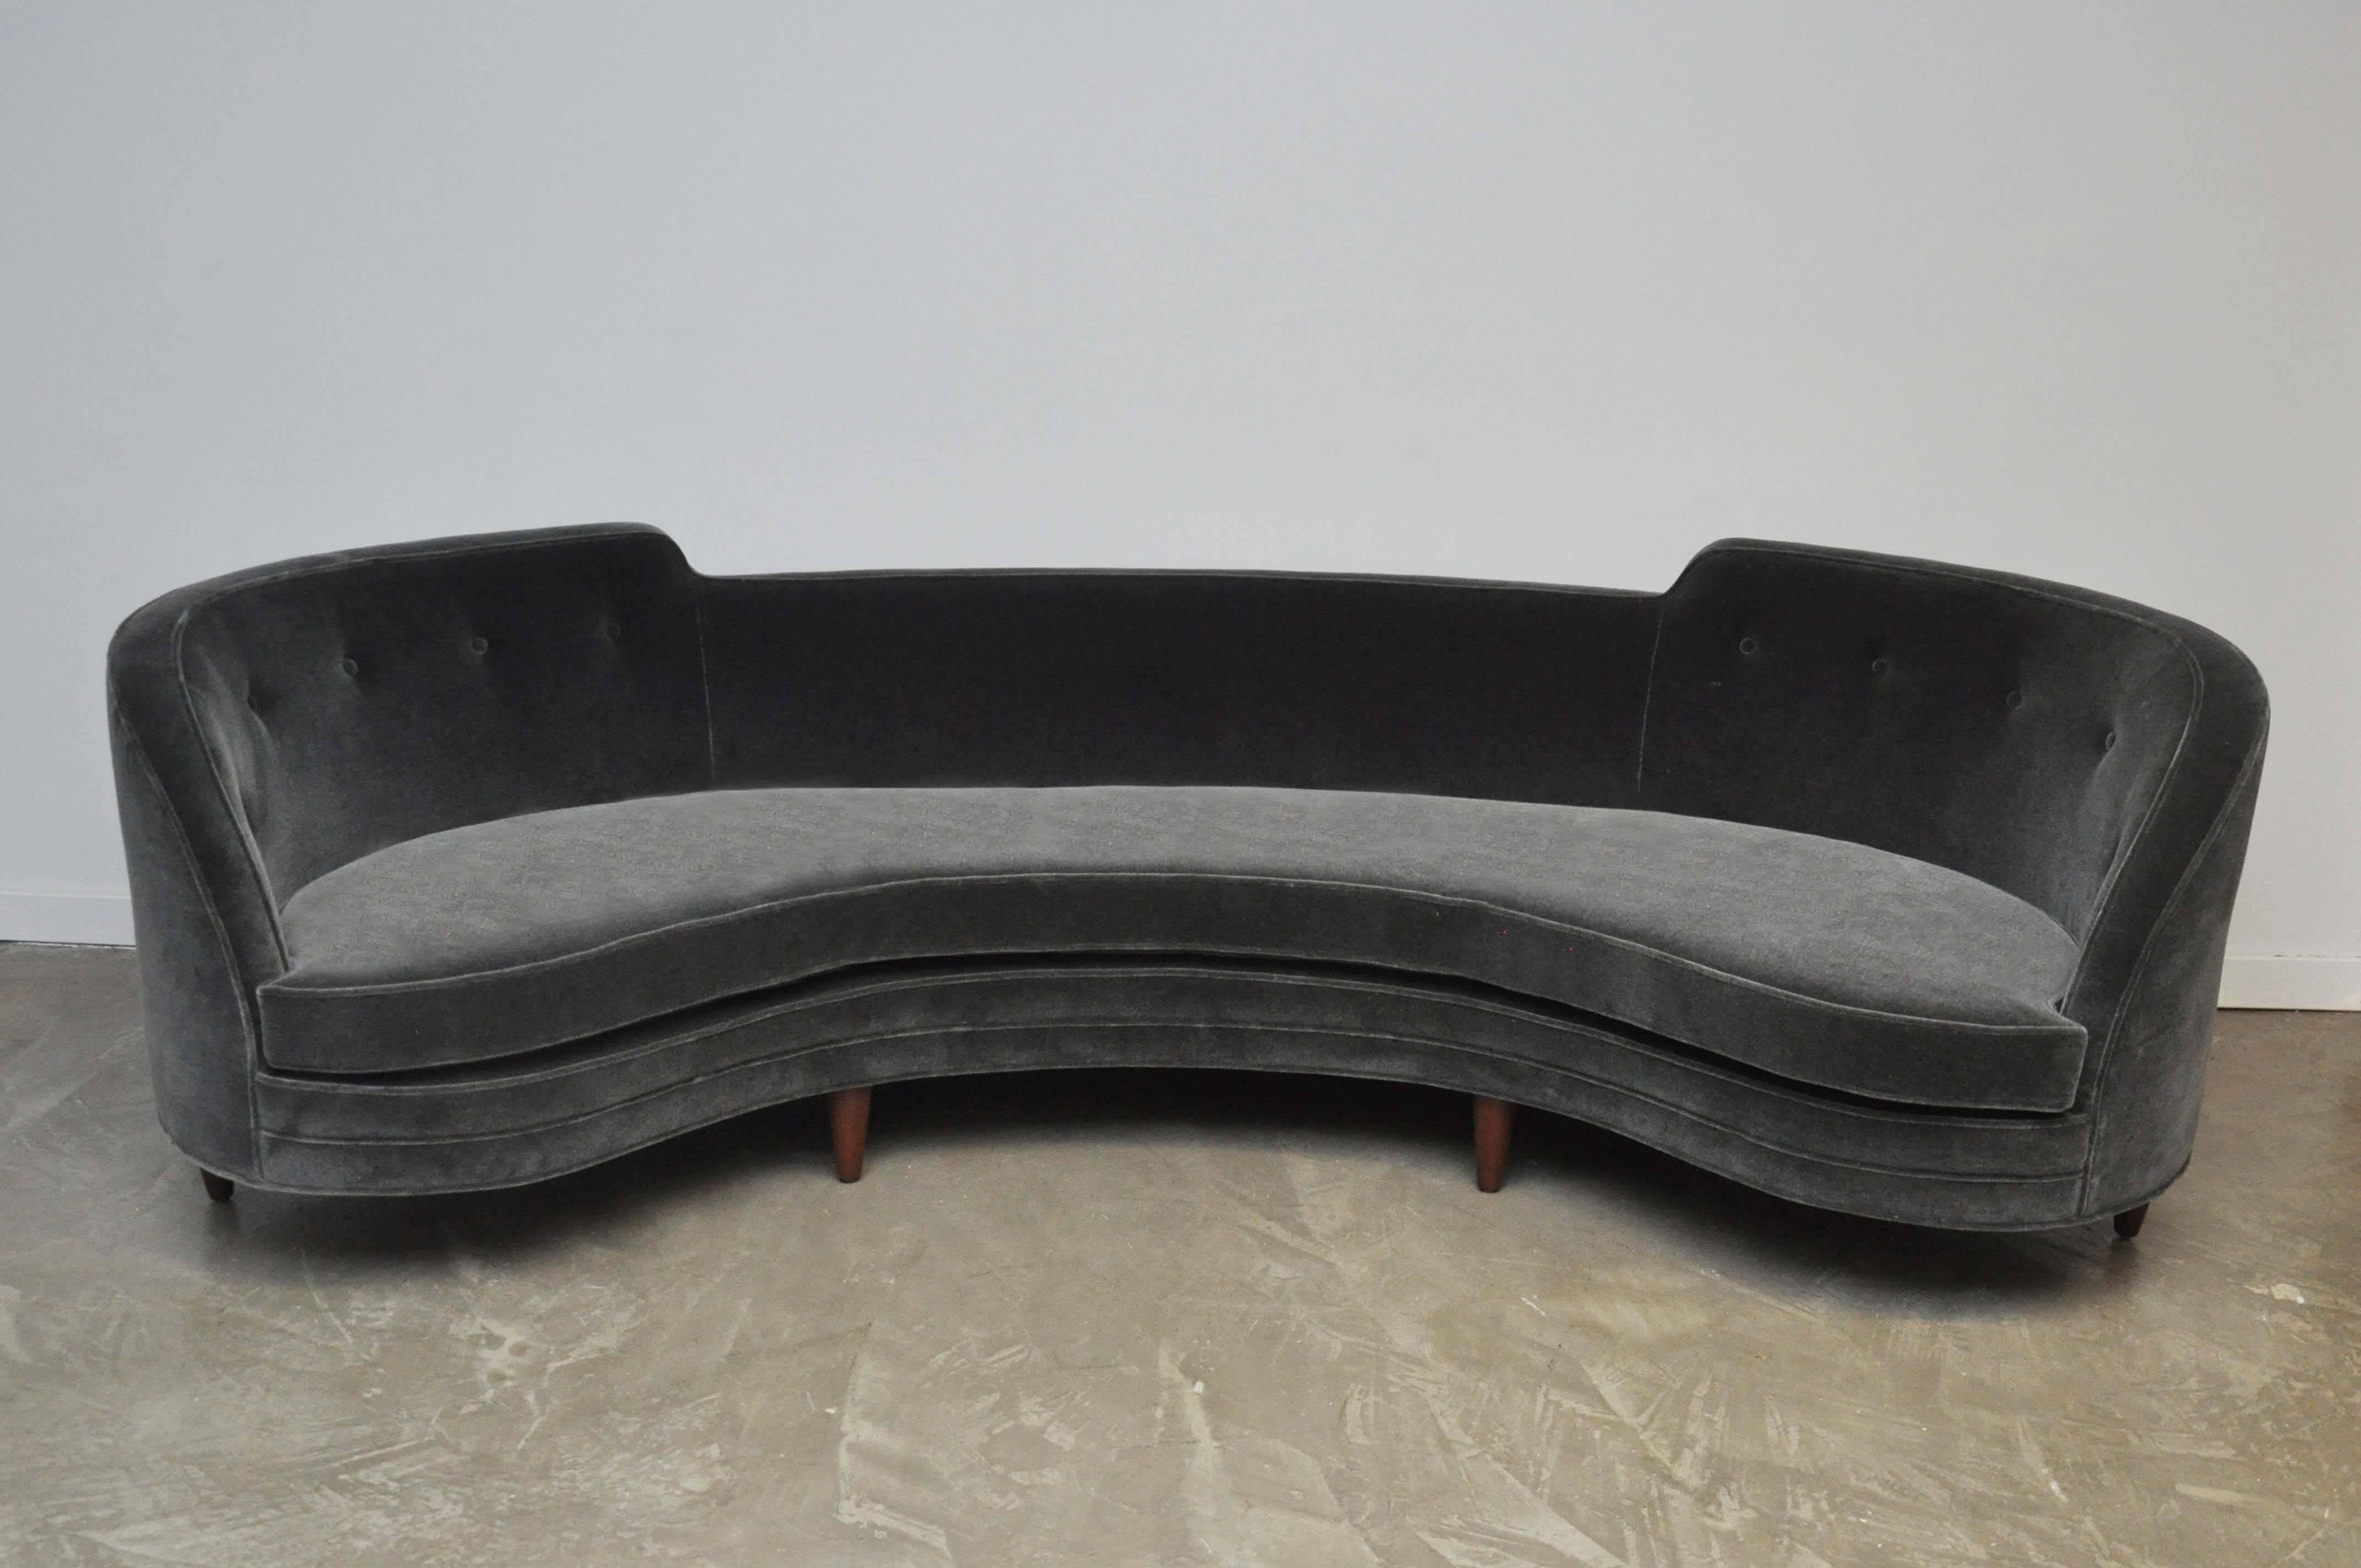 Oasis sofa designed by Edward Wormley for Dunbar. Fully restored. New charcoal mohair upholstery. Rare design, circa 1950.